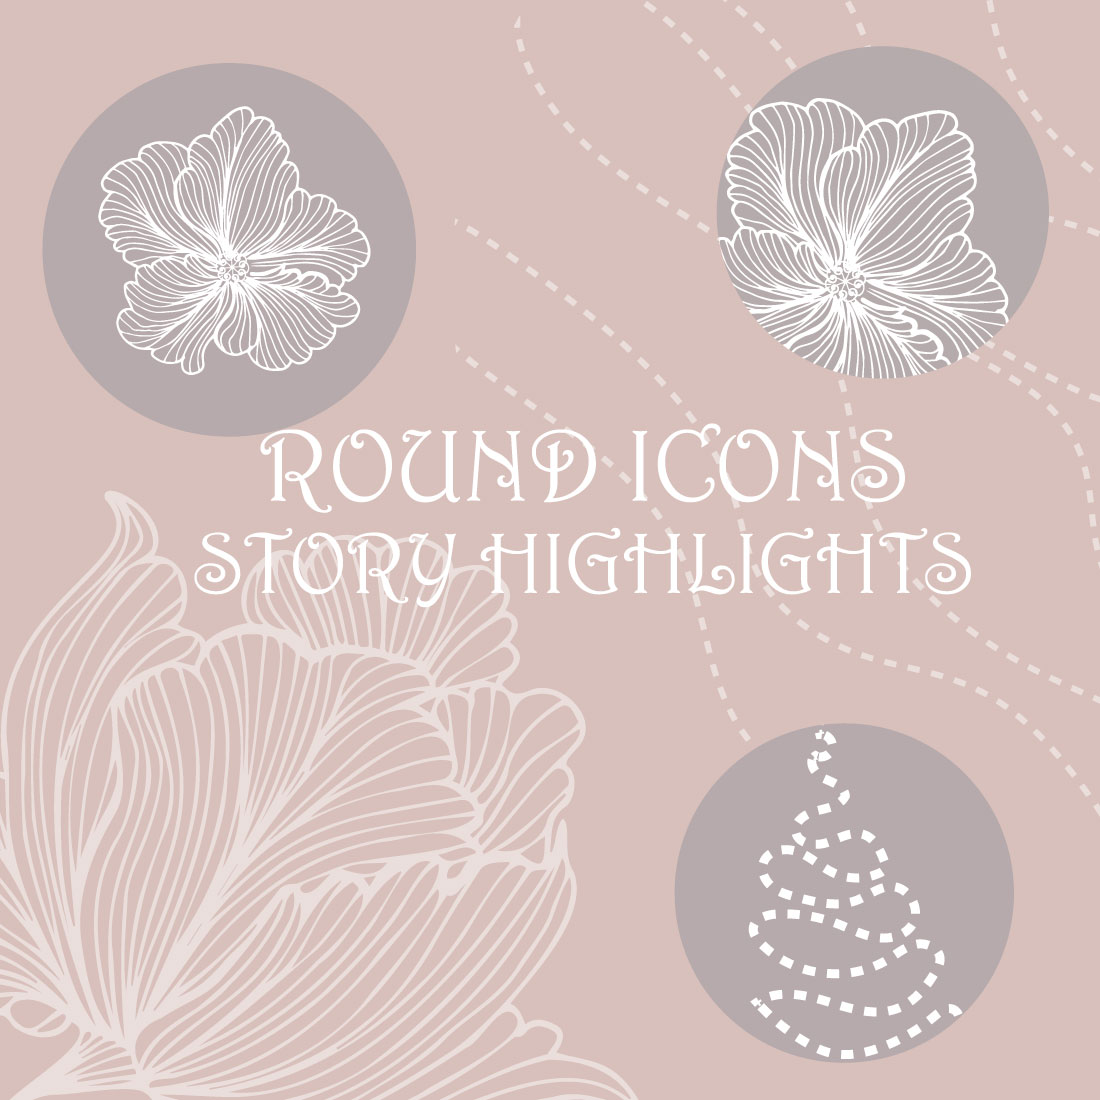 12 Round Icons for Story Highlights cover image.